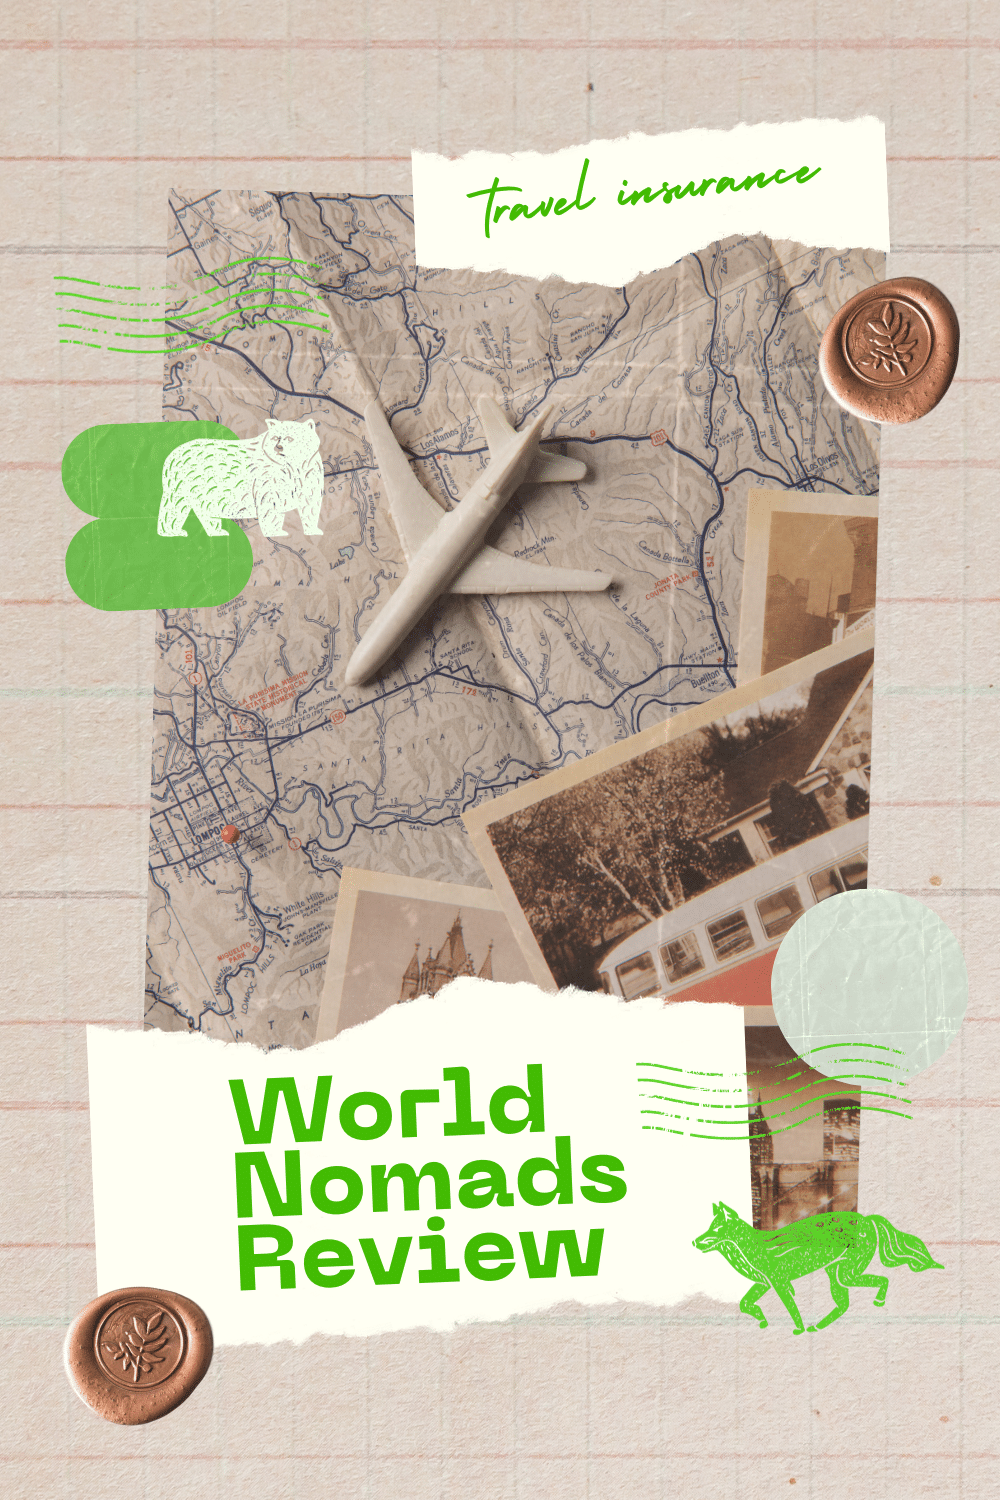 Travel Insurance Pinterest Pin by Aperlust: World Nomads Review